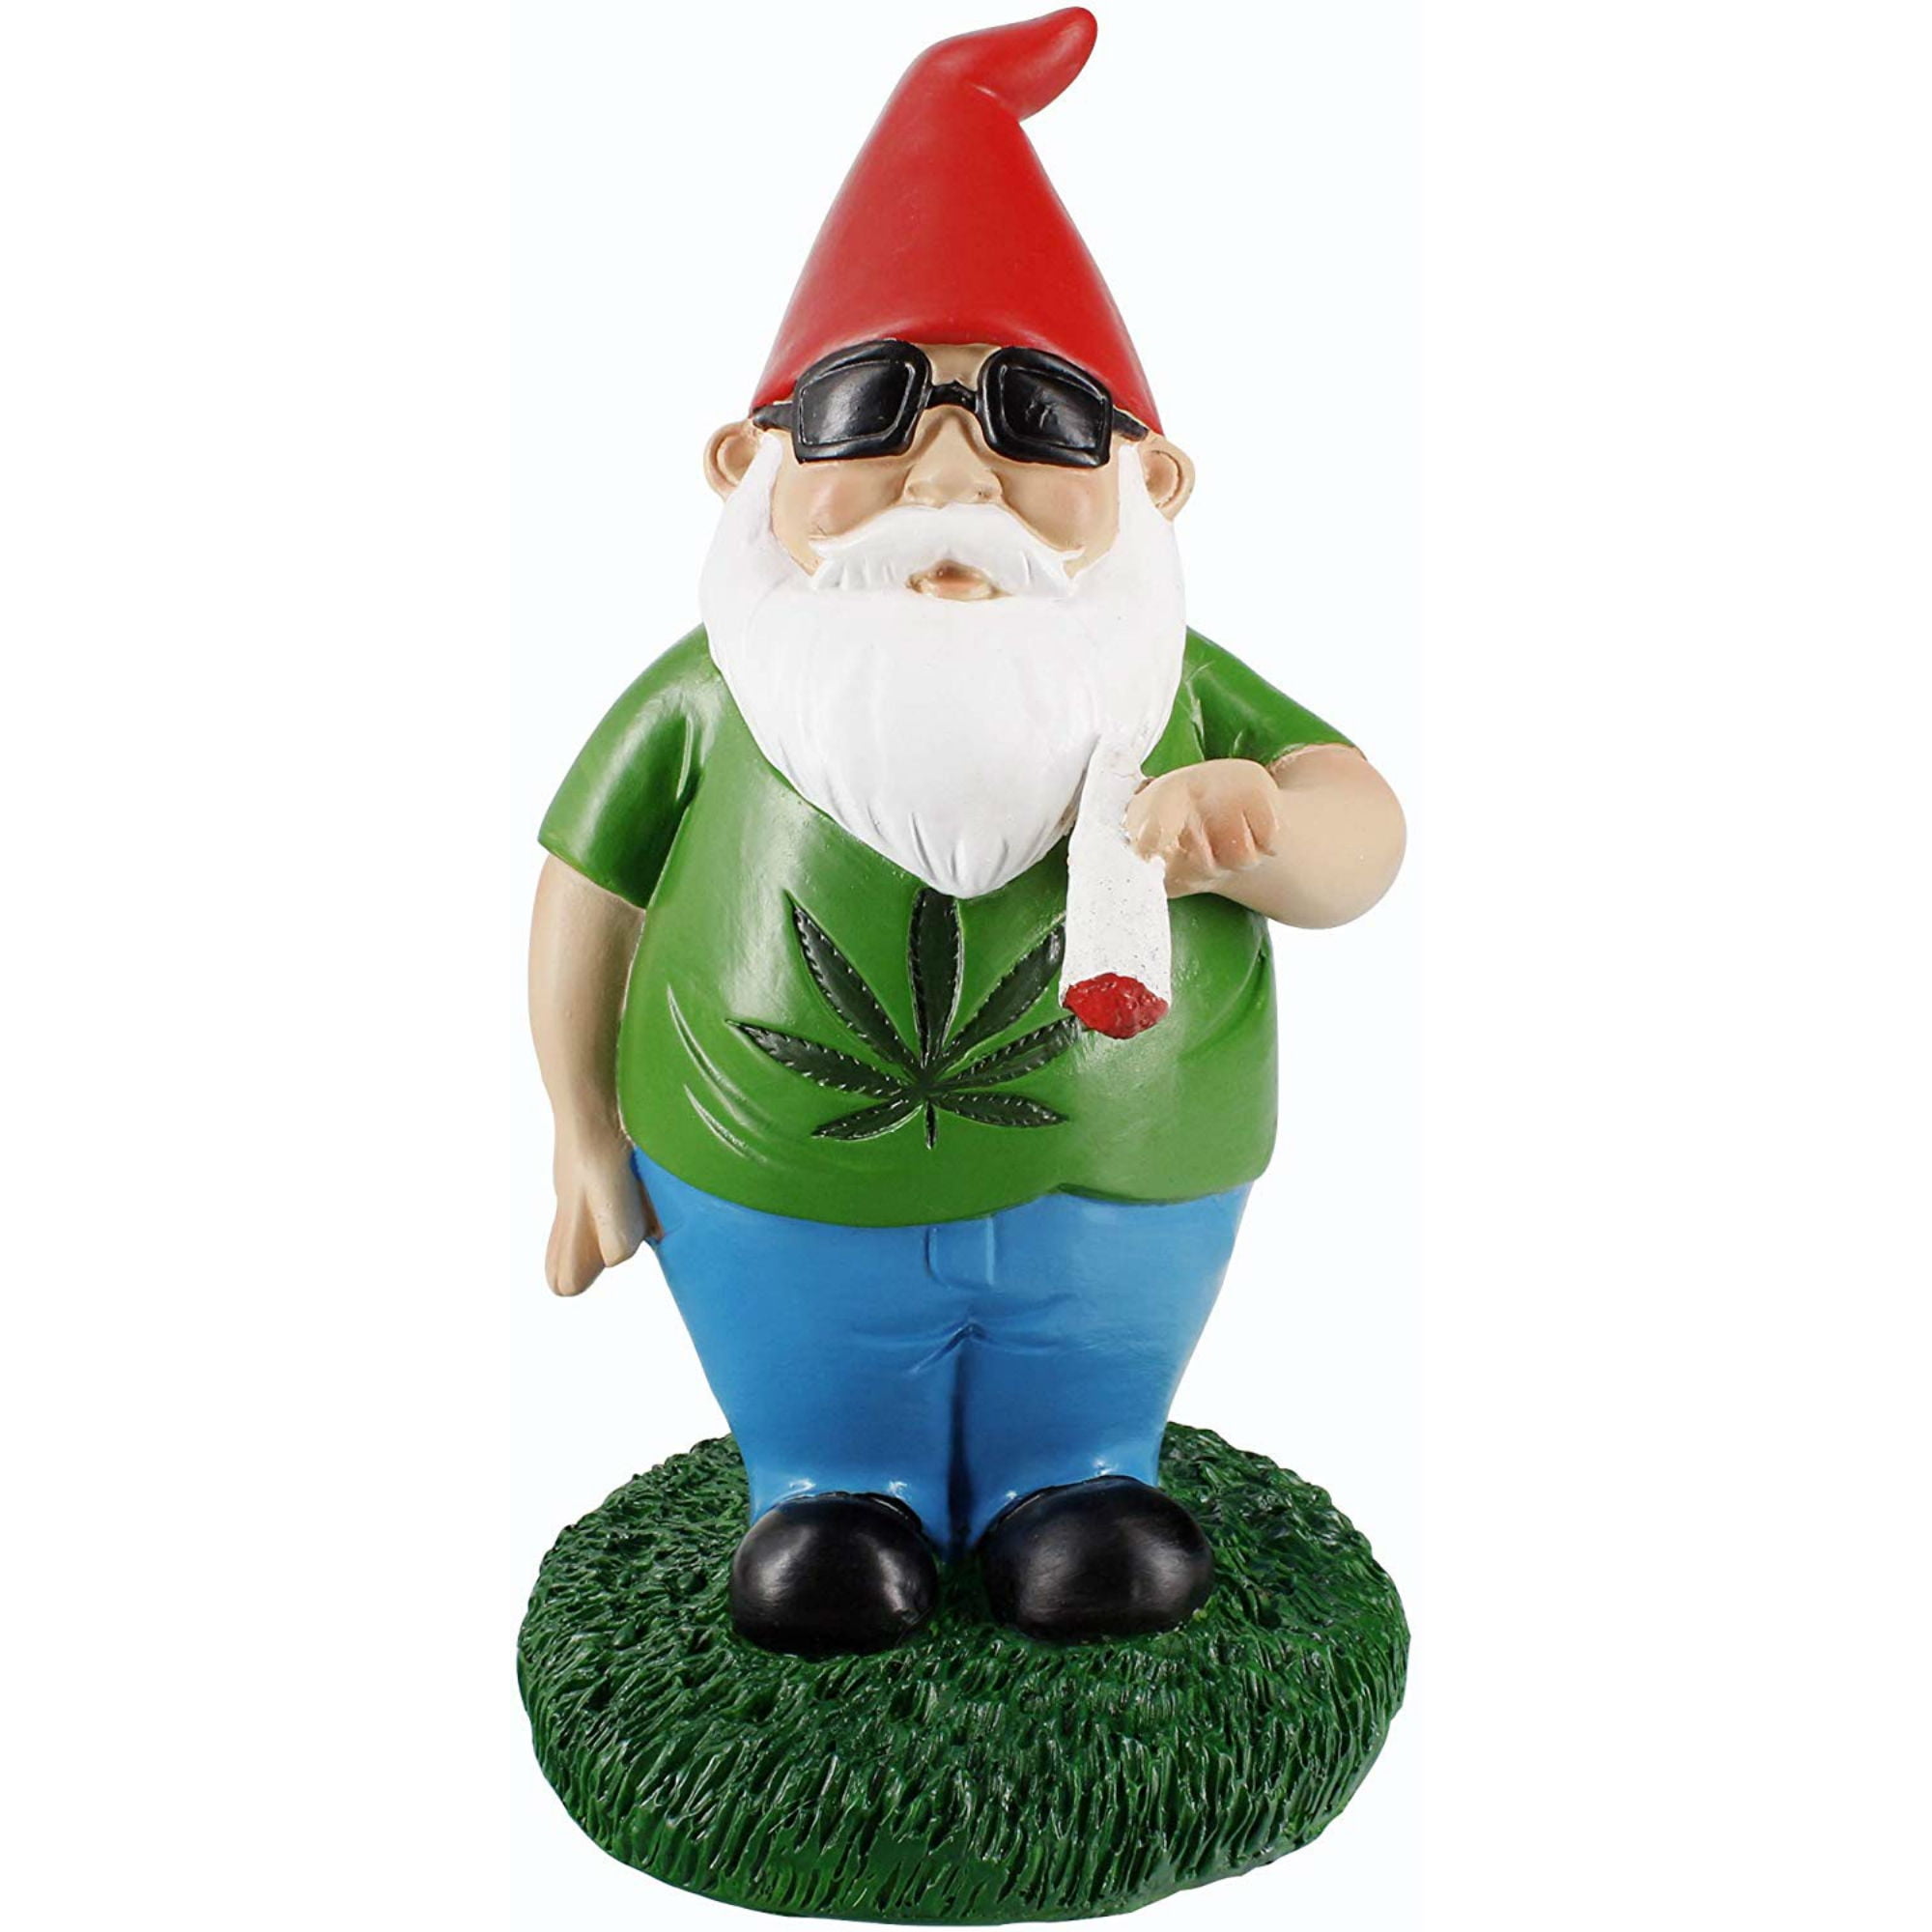 Gnometastic Beer Guzzling Garden Gnome Statue Indoor/Outdoor Funny Lawn Gnome